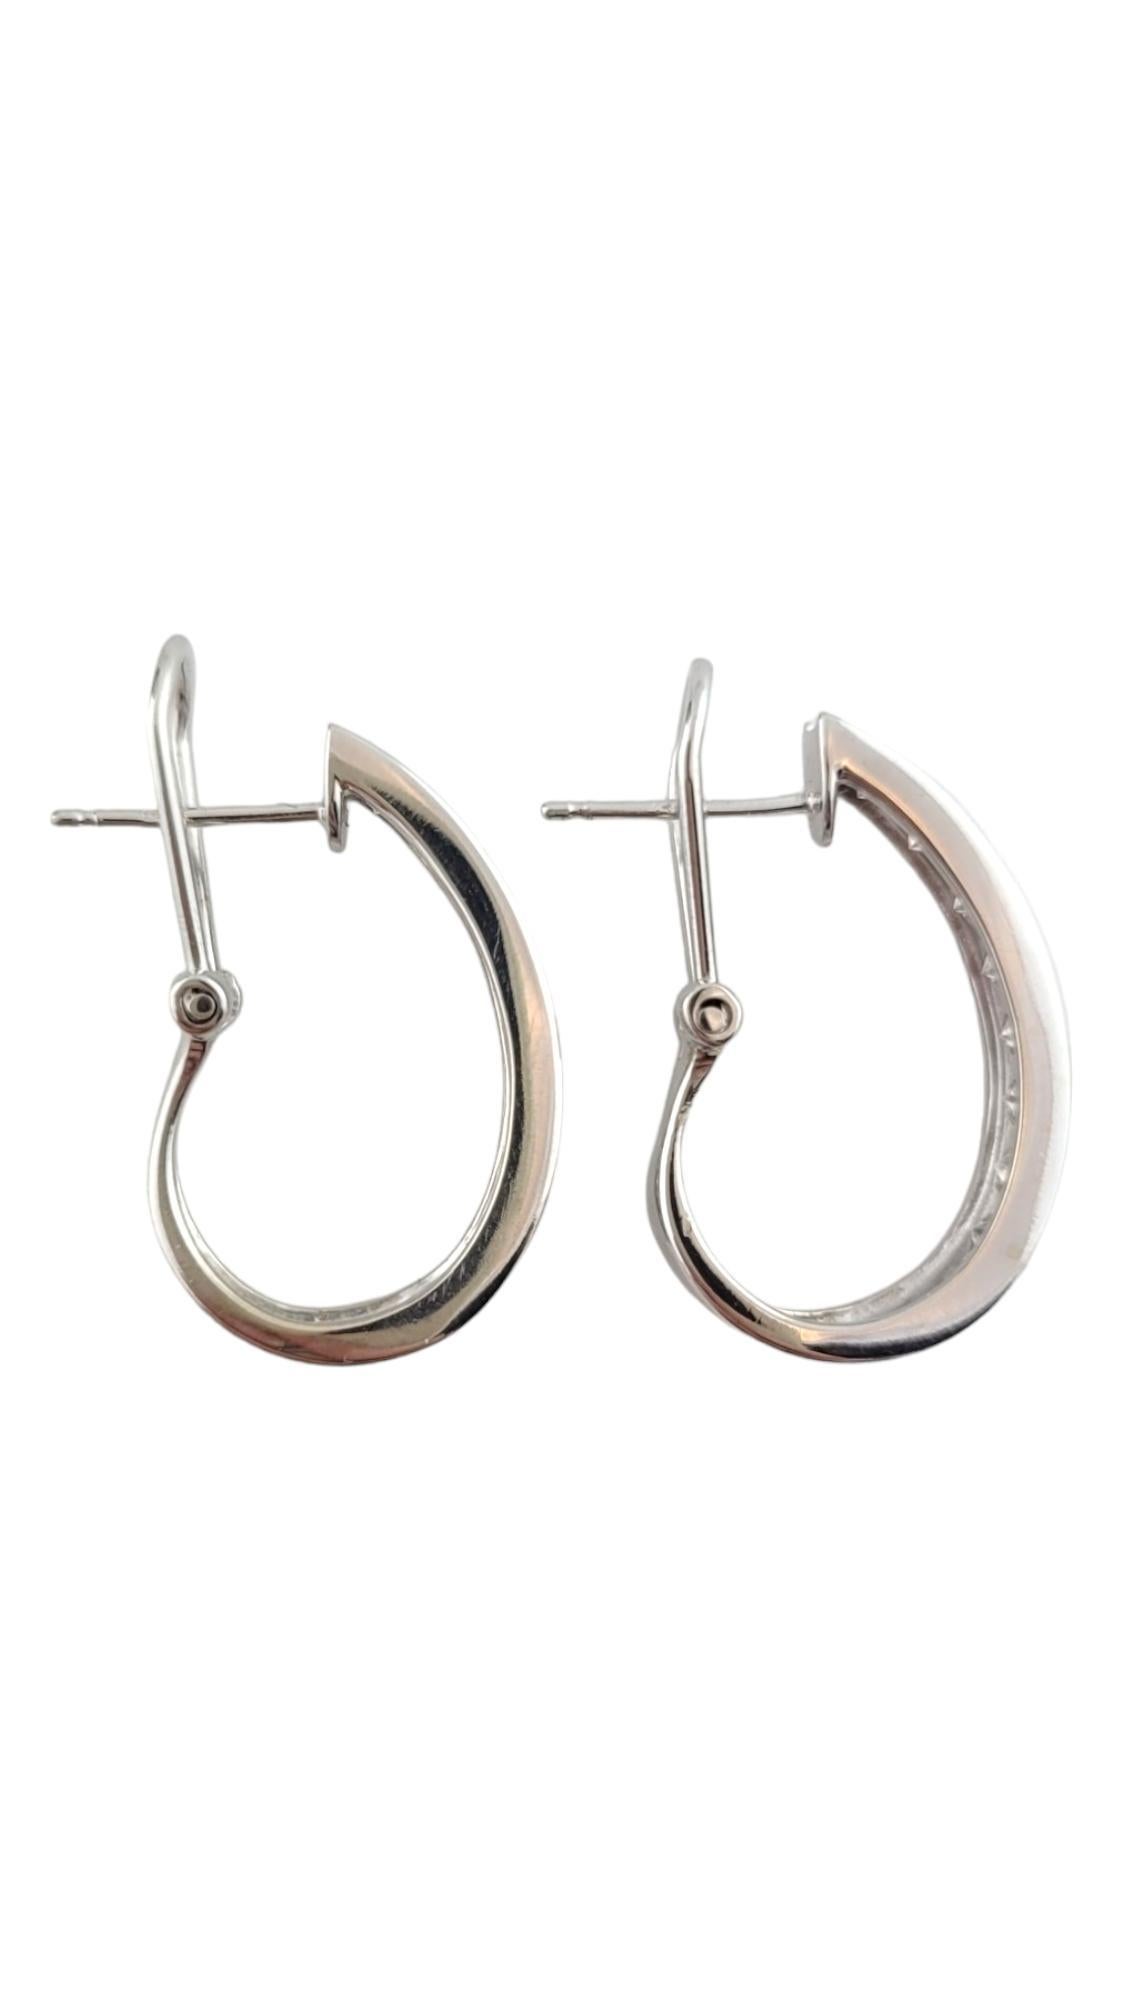 Vintage 14K White Gold Diamond Hoop Earrings

This gorgeous set of hoops were crafted from 14K white gold and feature 16 sparkling round brilliant cut diamonds!

Approximate total diamond weight: .72 cts

Diamond color: I

Diamond clarity: